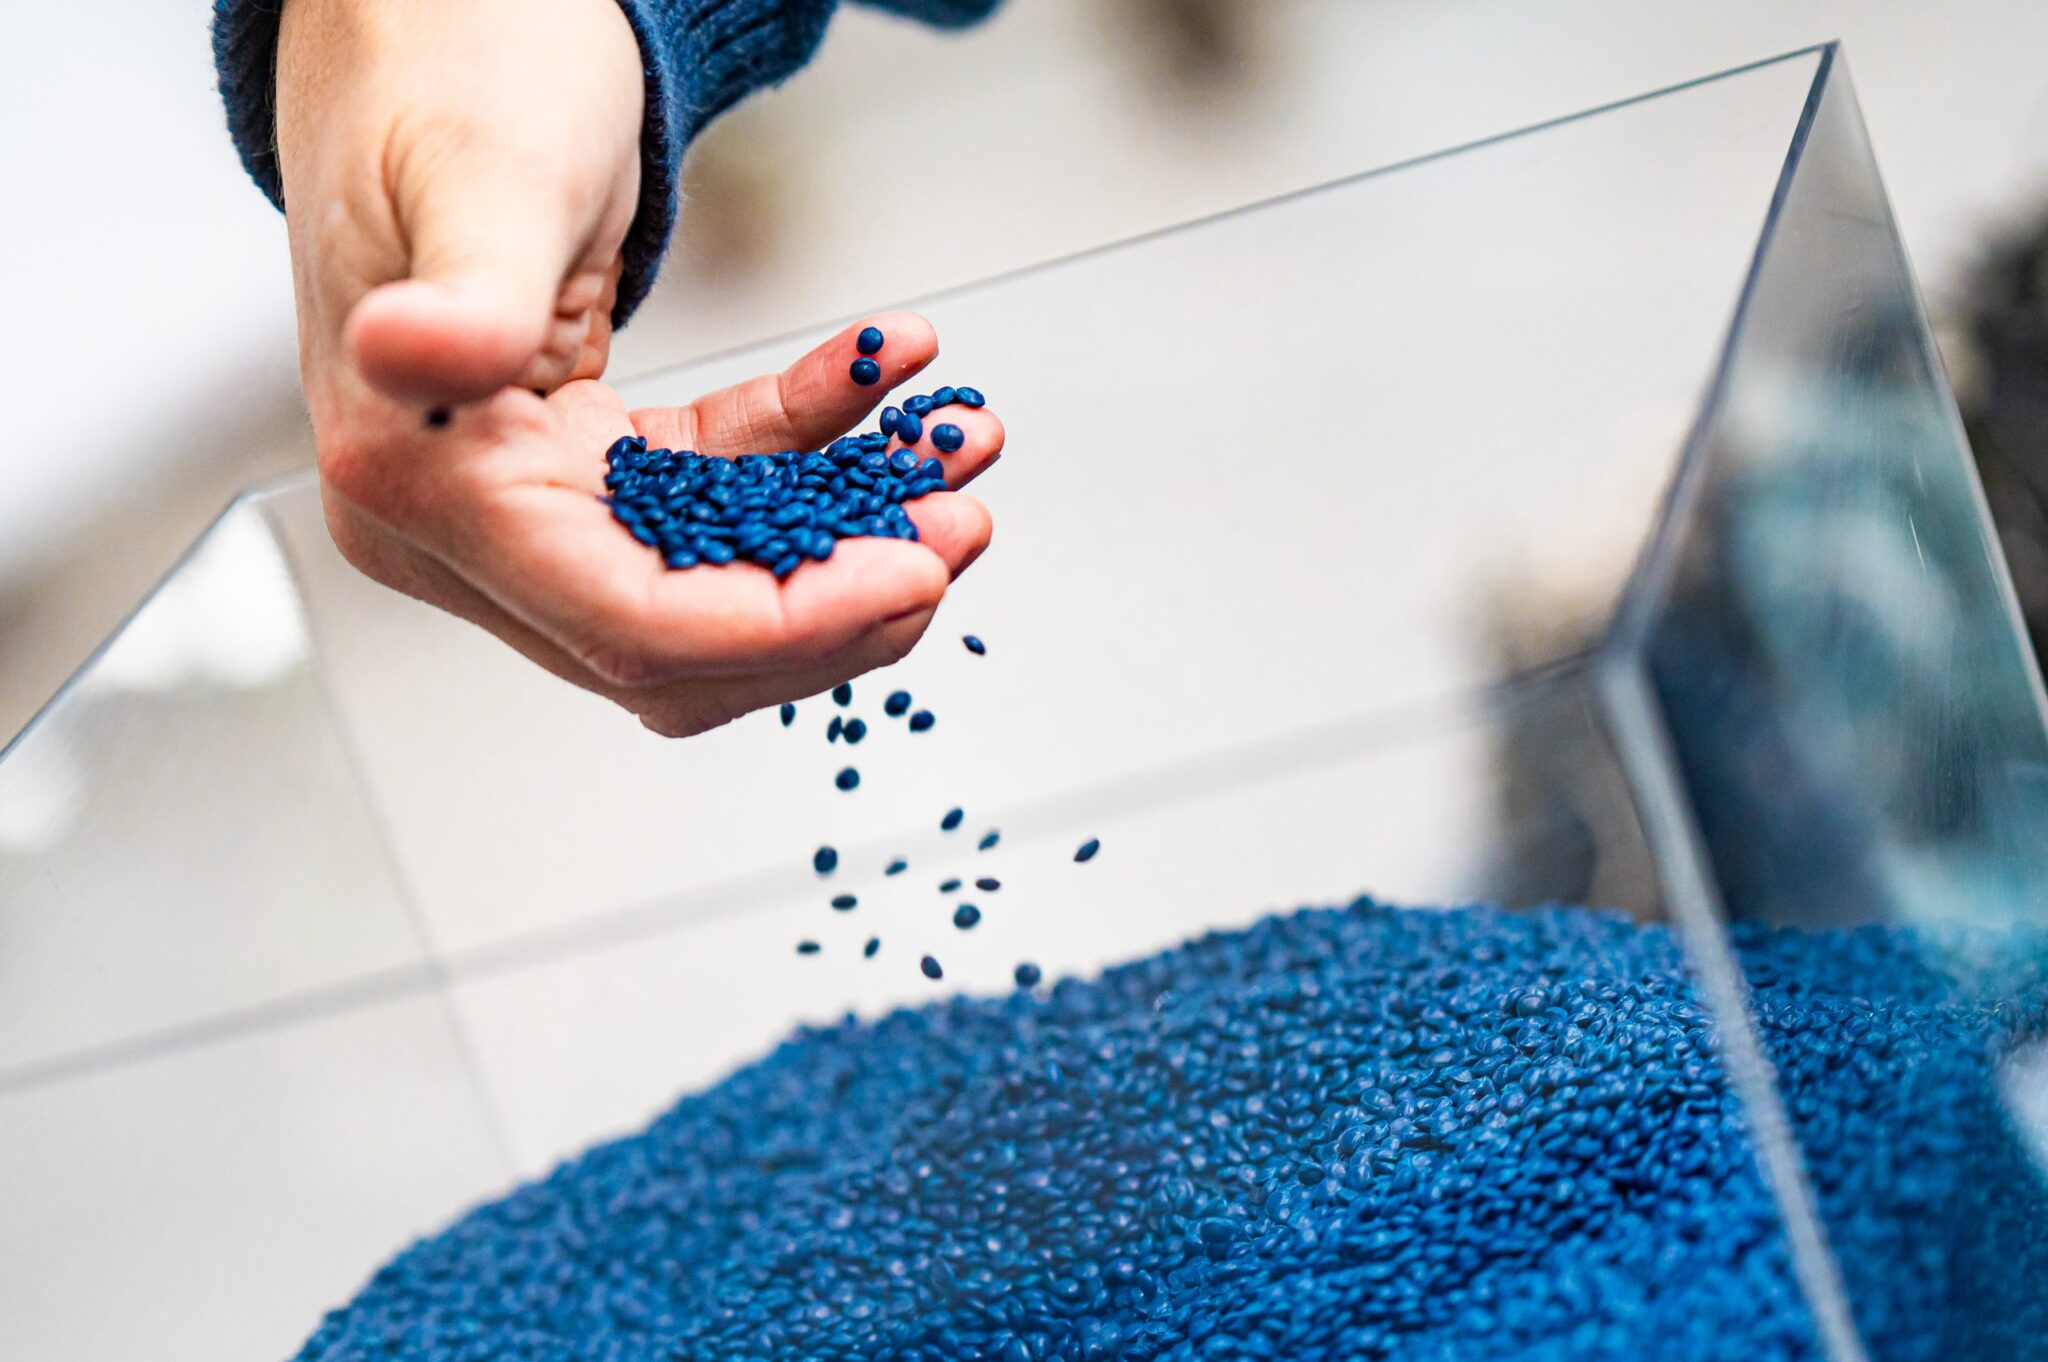 A hand strains blue plastic nurdles made from recycled marine debris from the Great Pacific Garbage Patch